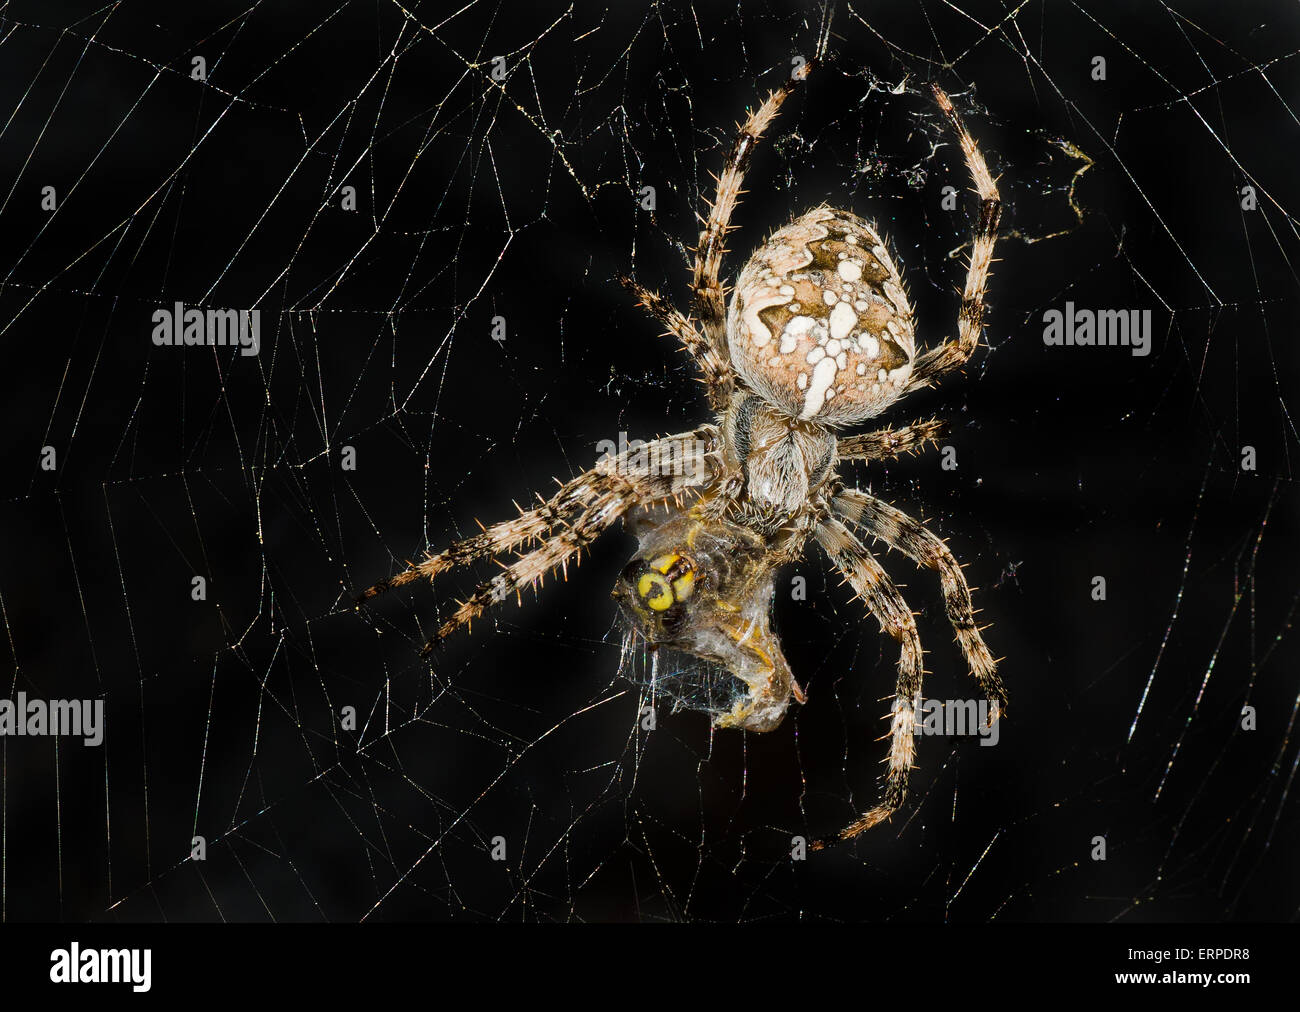 Night image of spider wrapping its victim (wasp) up into the web for further eating. Stock Photo